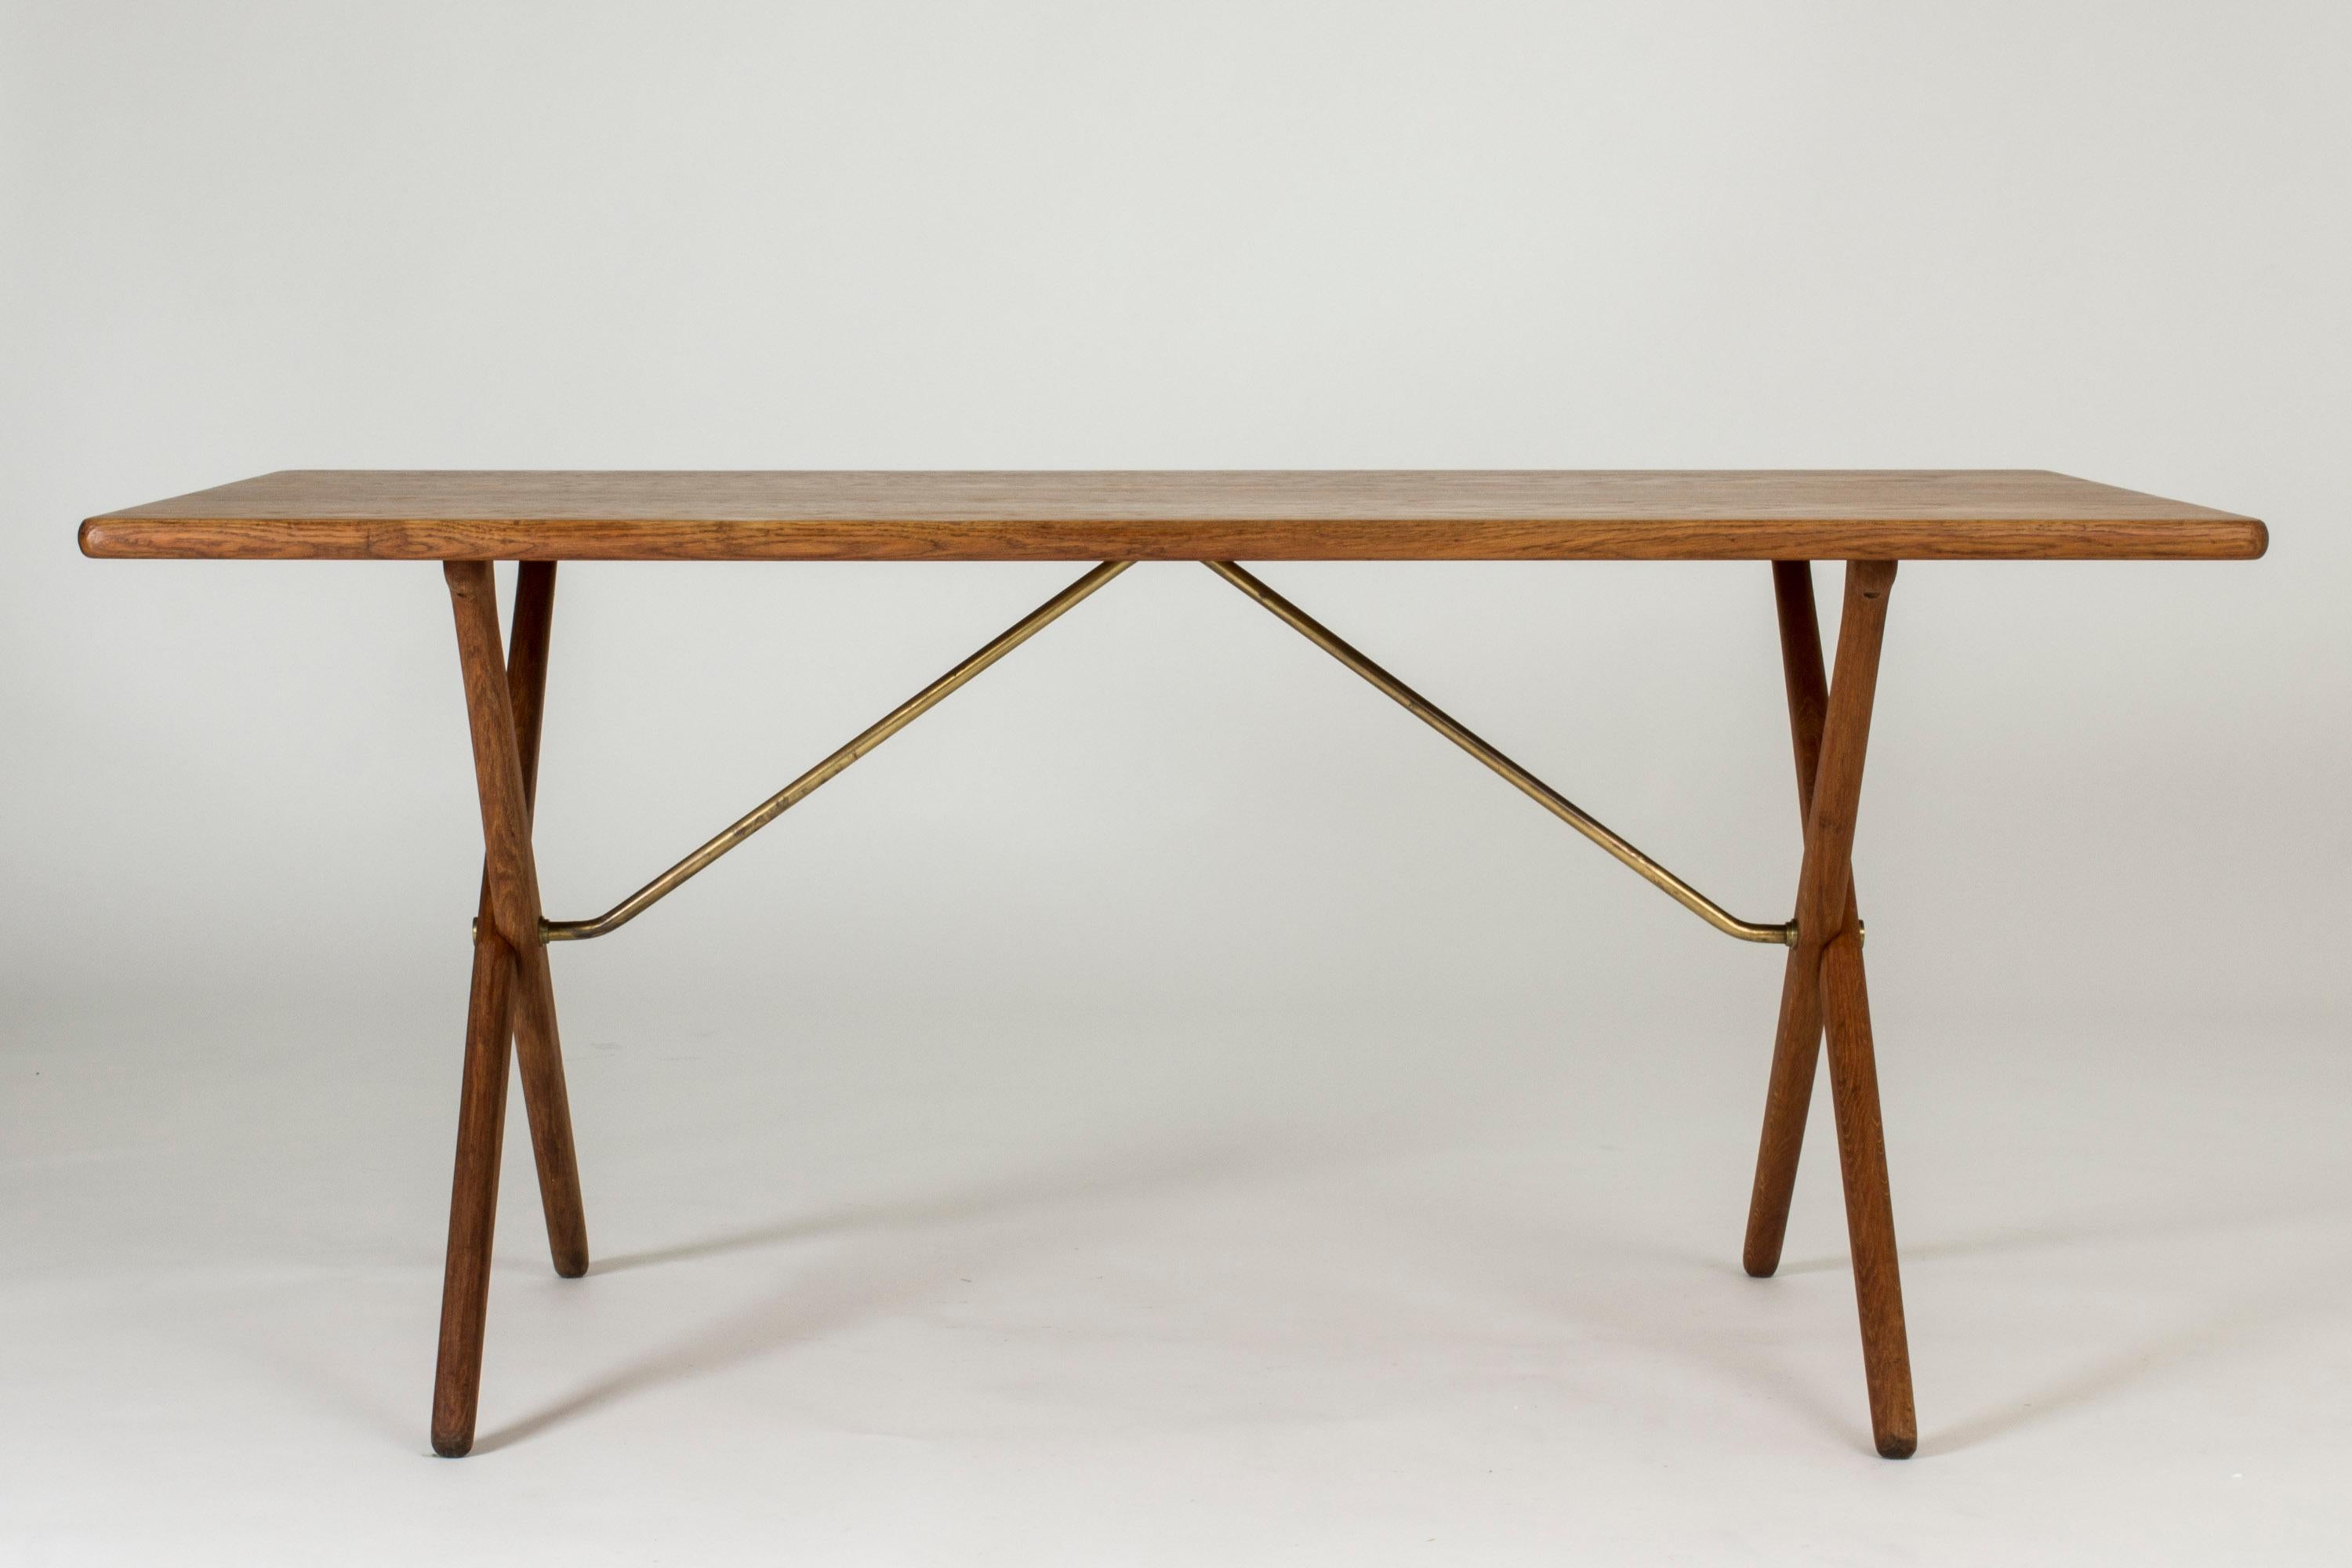 Cool “AT 303” dining table by Hans J. Wegner, with elegantly crossed legs. Made from oak with beautiful, rustic woodgrain.